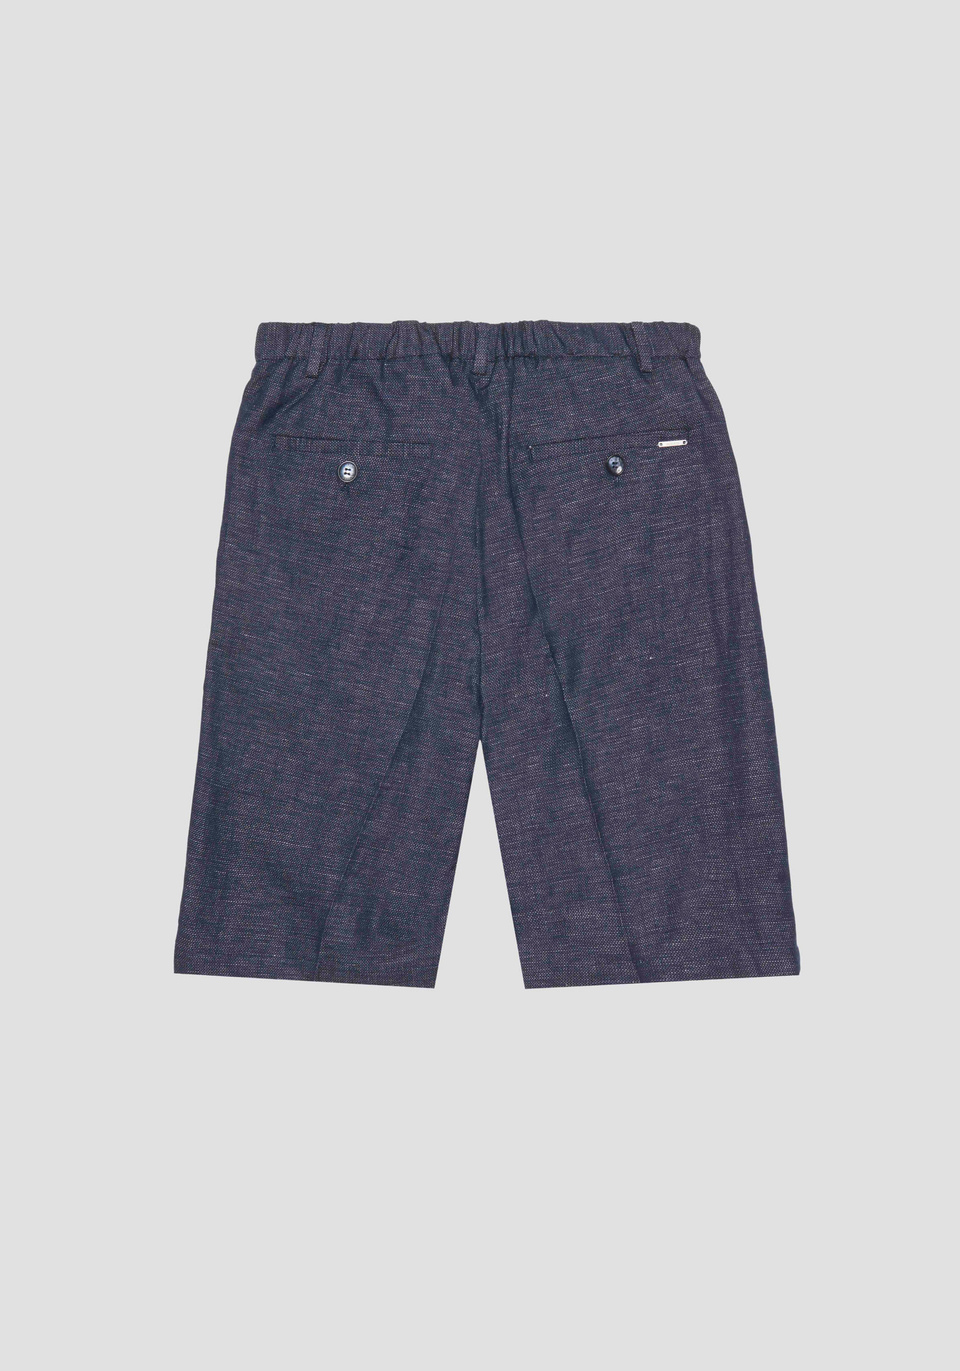 CARROT FIT "GUSTAF" SHORTS IN ARMORED COTTON-LINEN BLEND - Antony Morato Online Shop